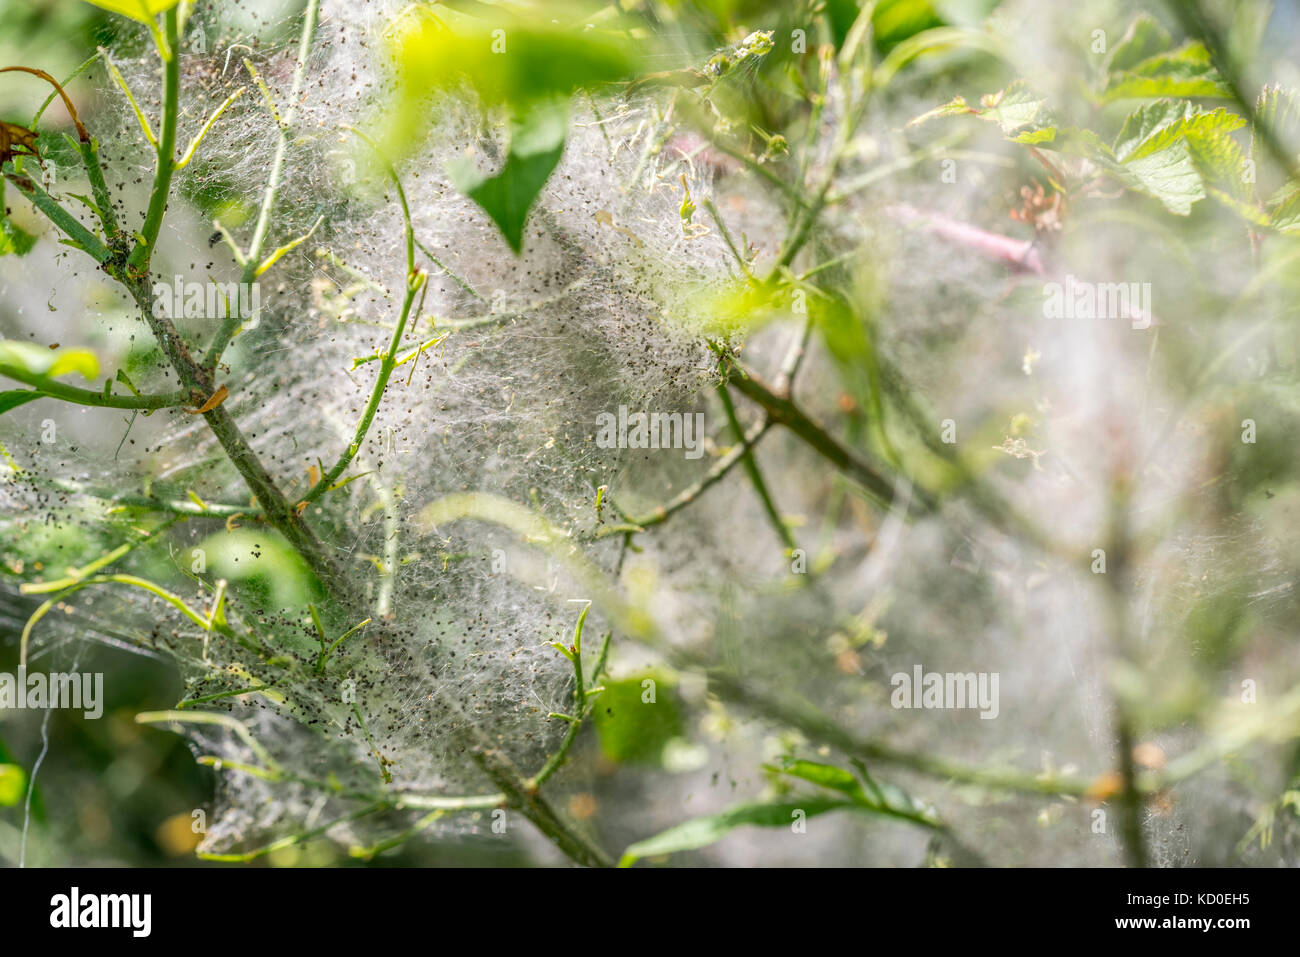 detail of a plant covered with ermine moth web with caterpillars at spring time Stock Photo